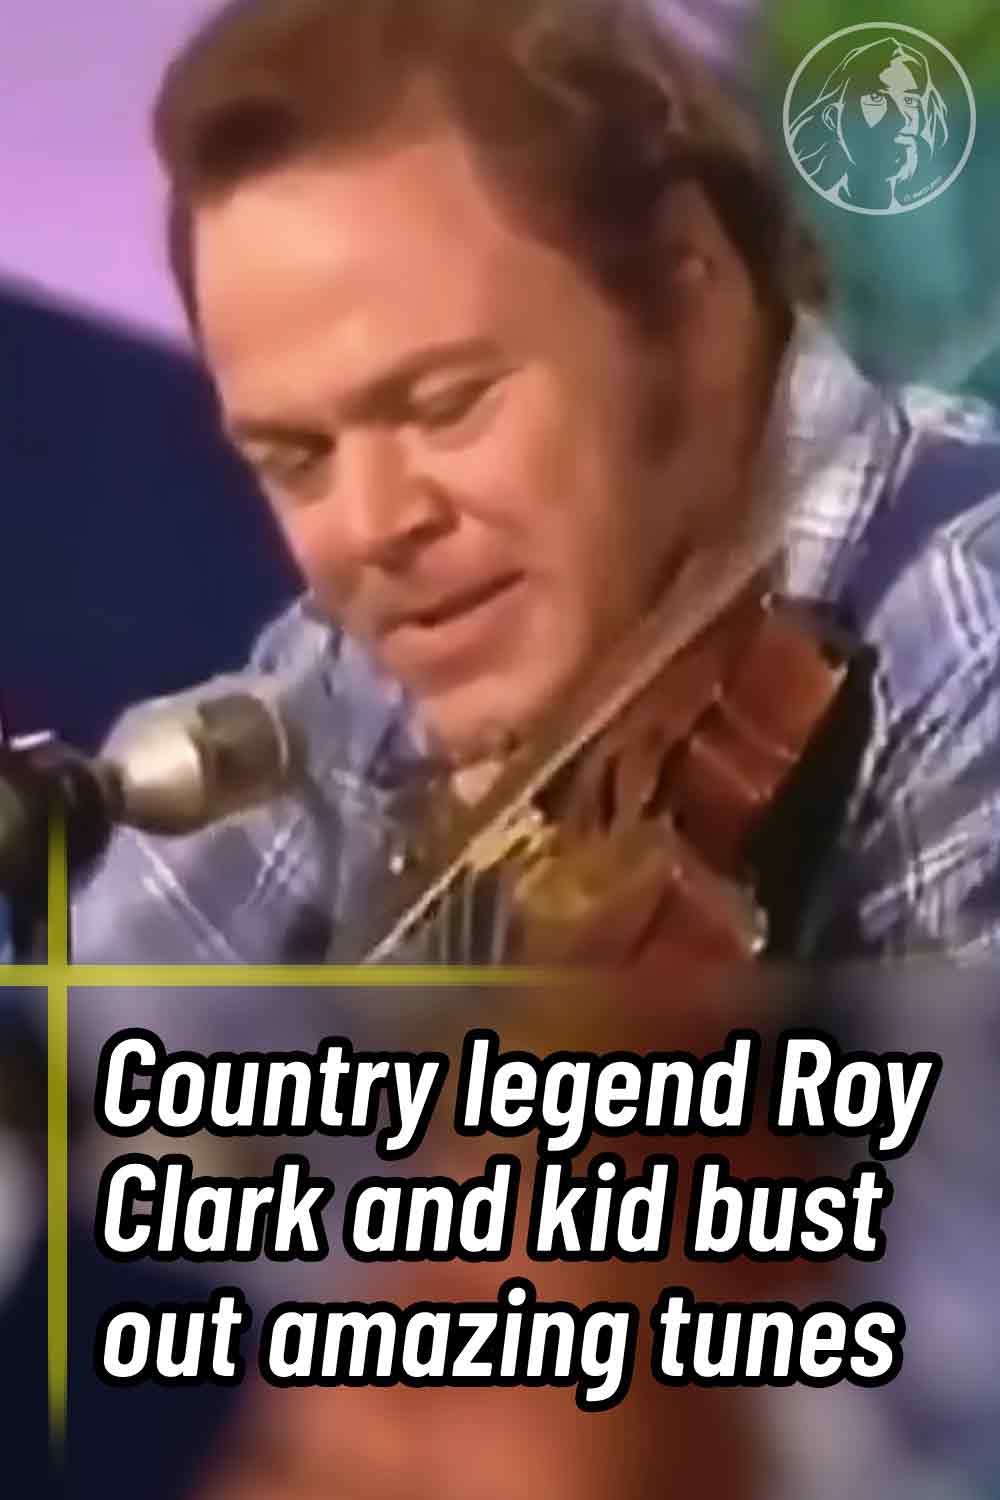 Country legend Roy Clark and kid bust out amazing tunes